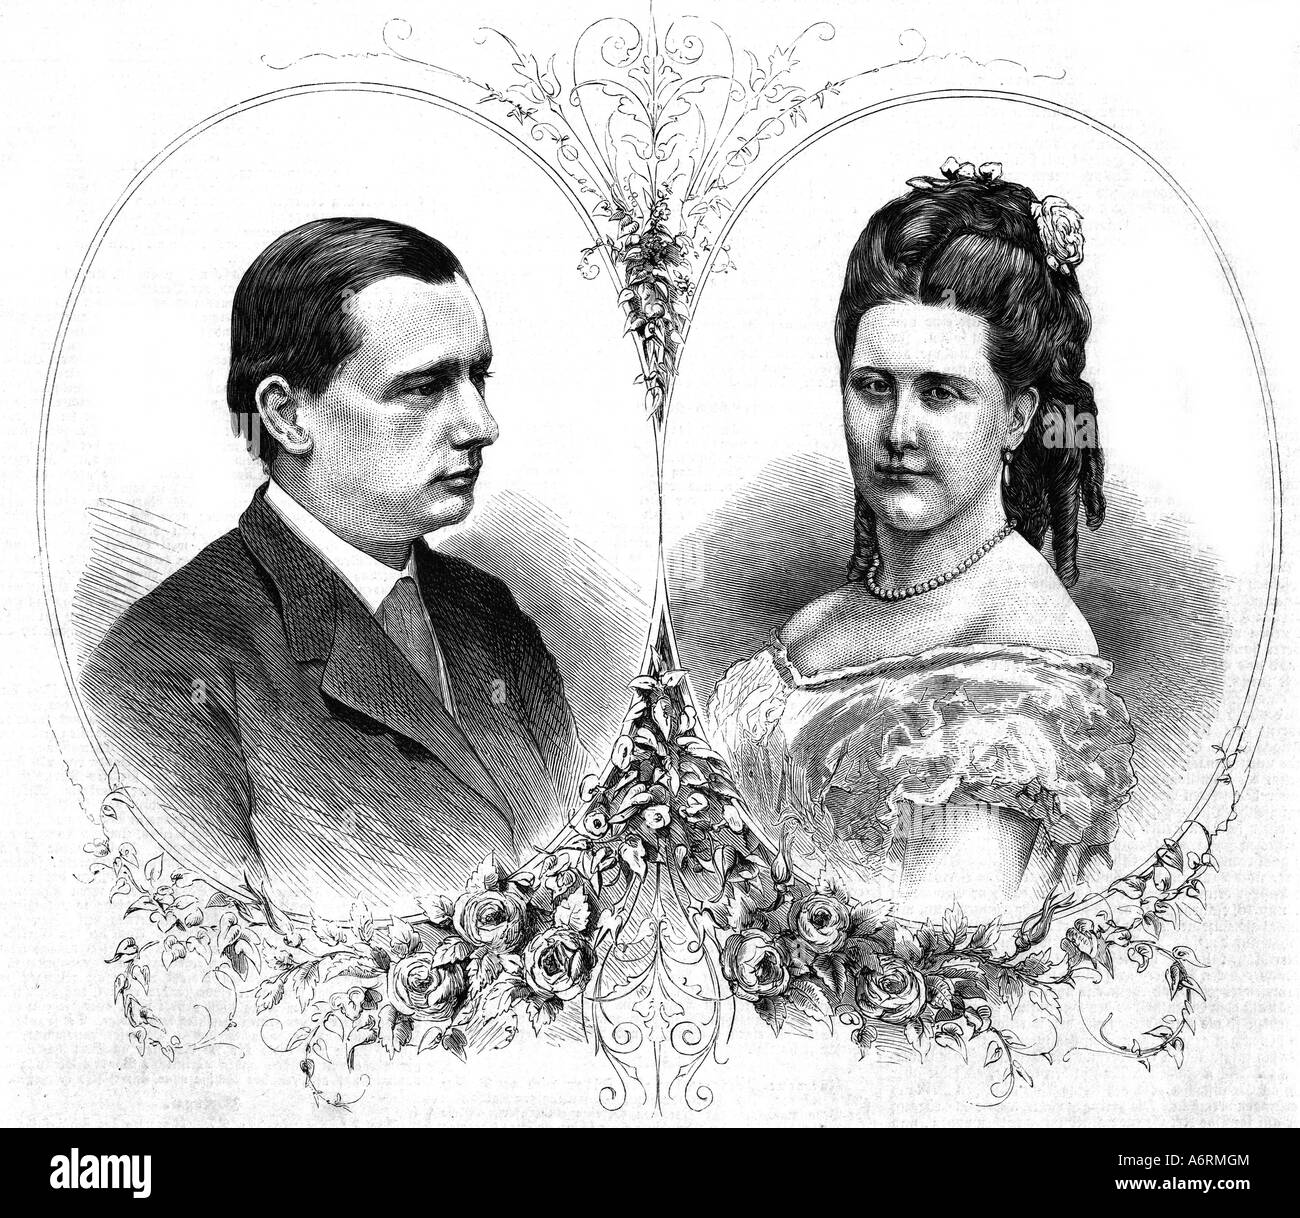 Charles August, 31.7.1804 - 20.11.1894, Heditary Grand Duke of Saxe-Weimar-Eisenach, with his bride Pauline of Saxe-Weimar-Eisen Stock Photo